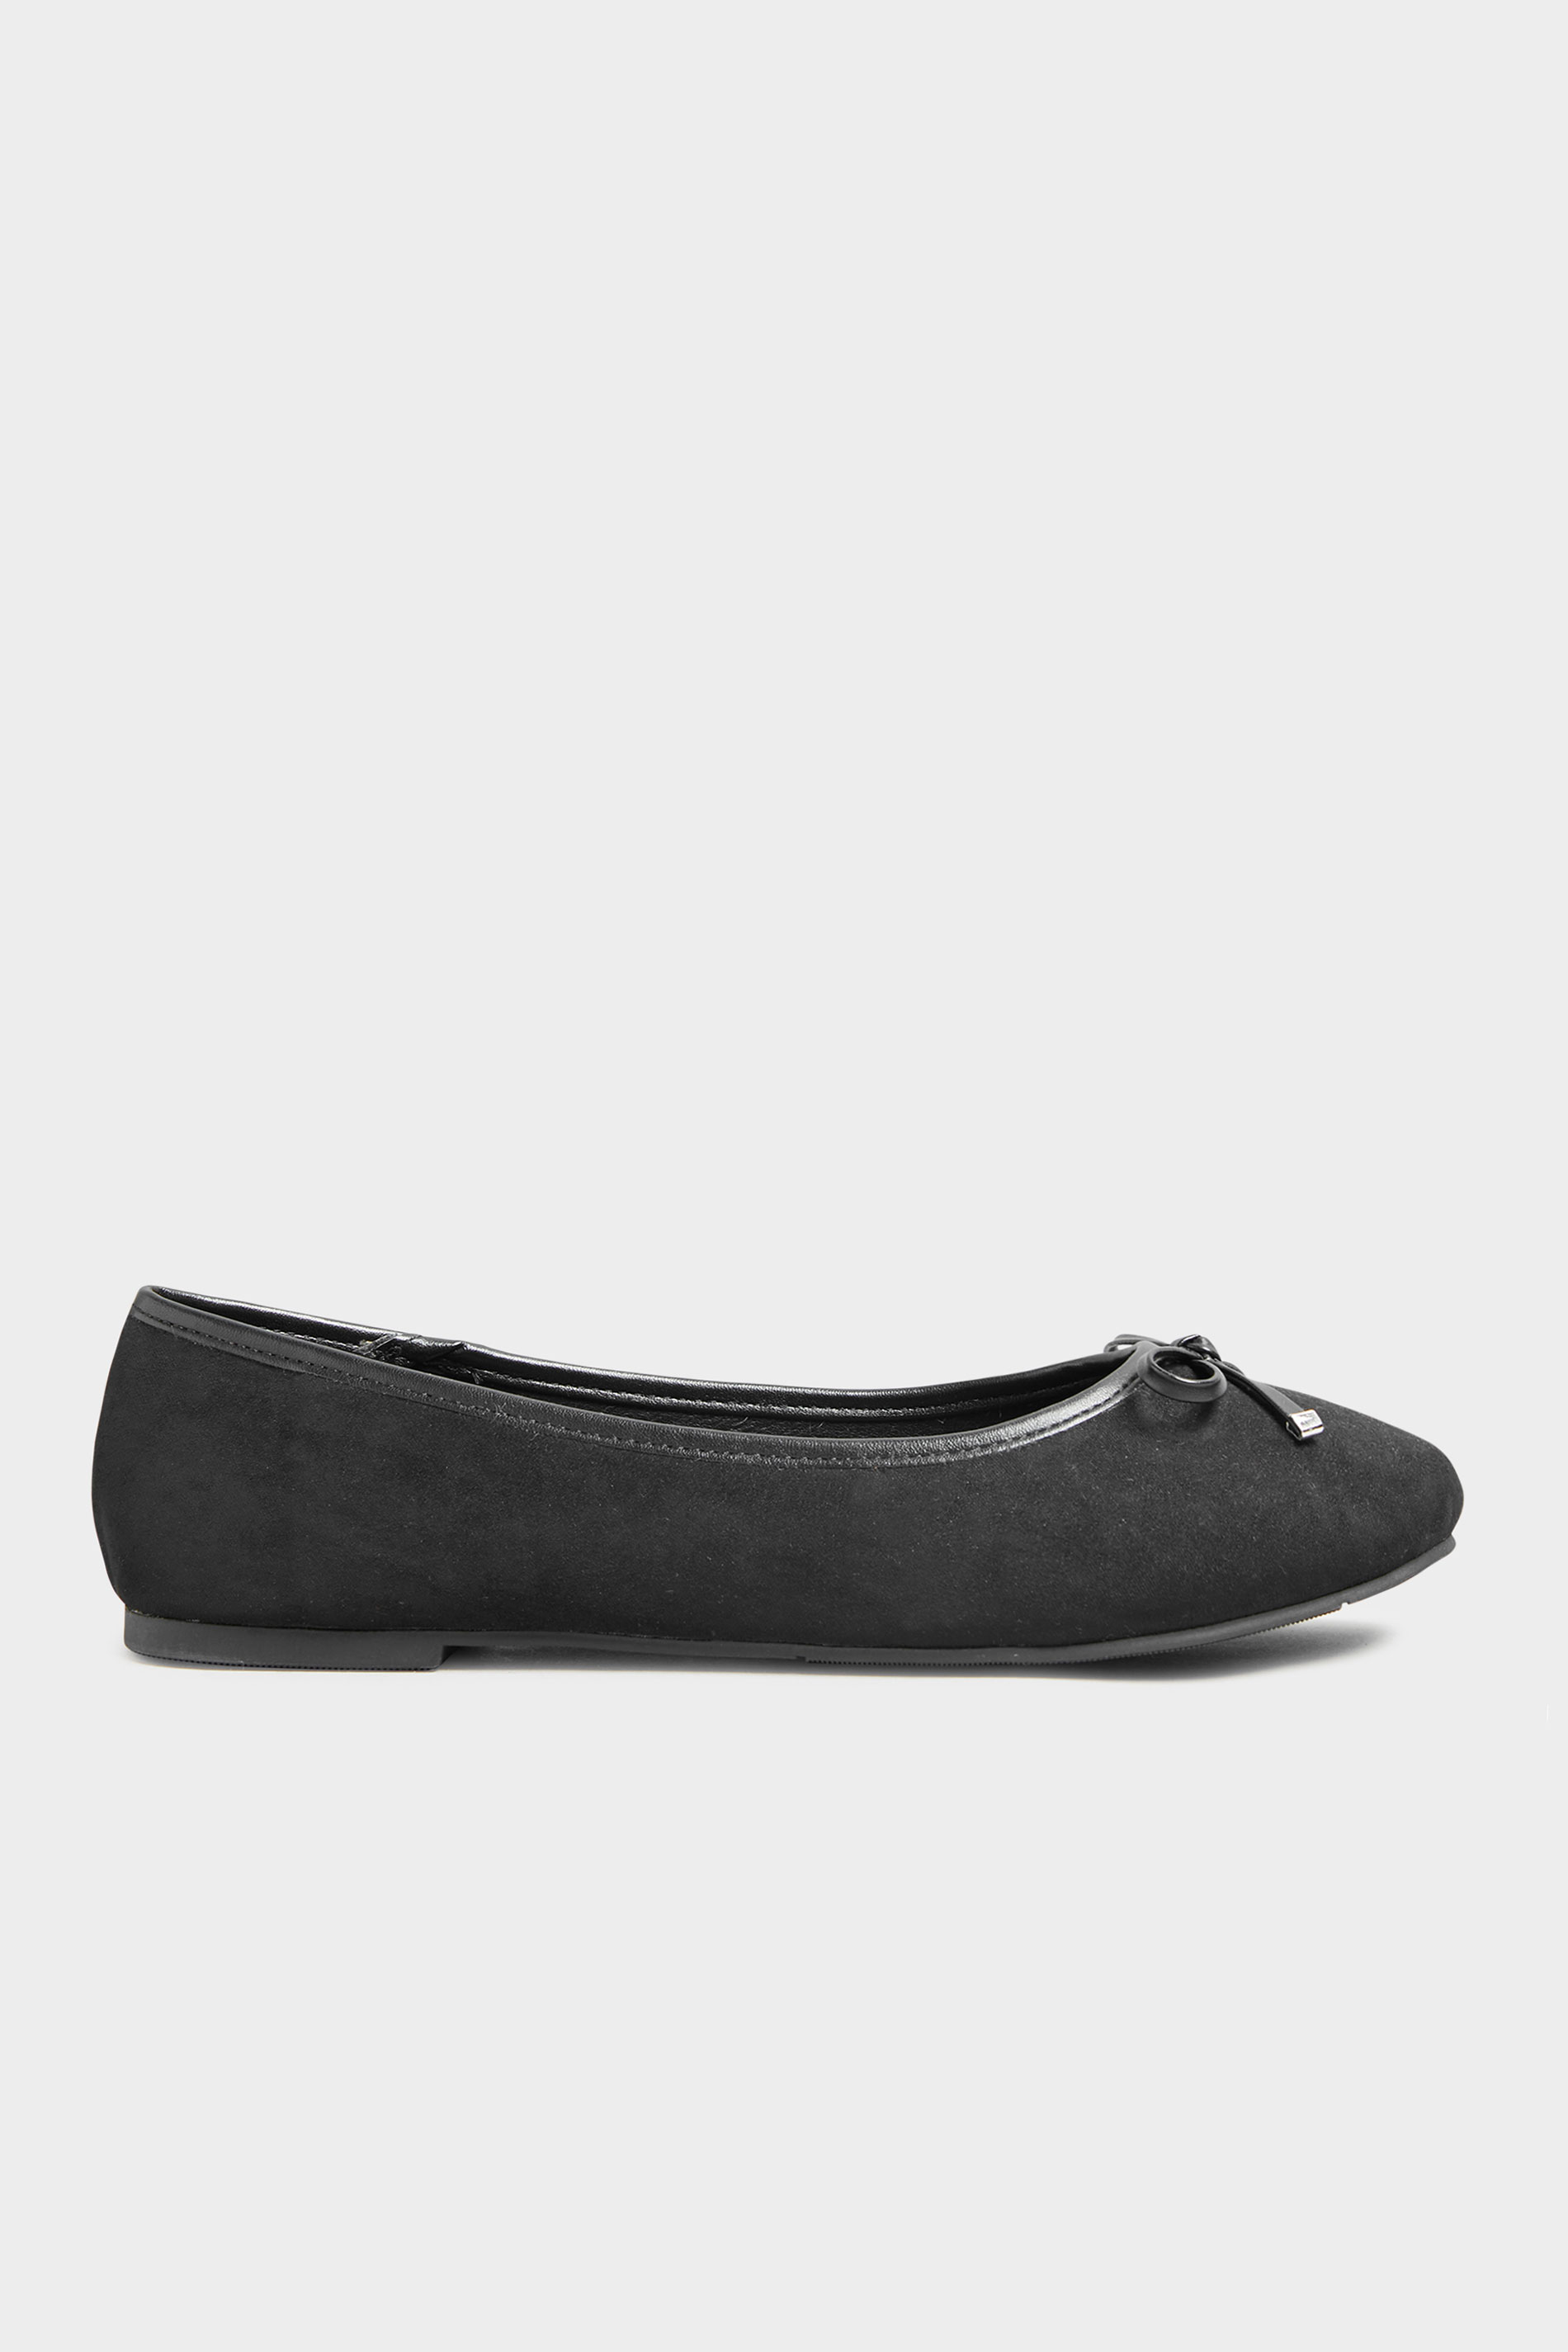 Black Faux Suede Ballerina Pumps In Extra Wide Fit | Long Tall Sally